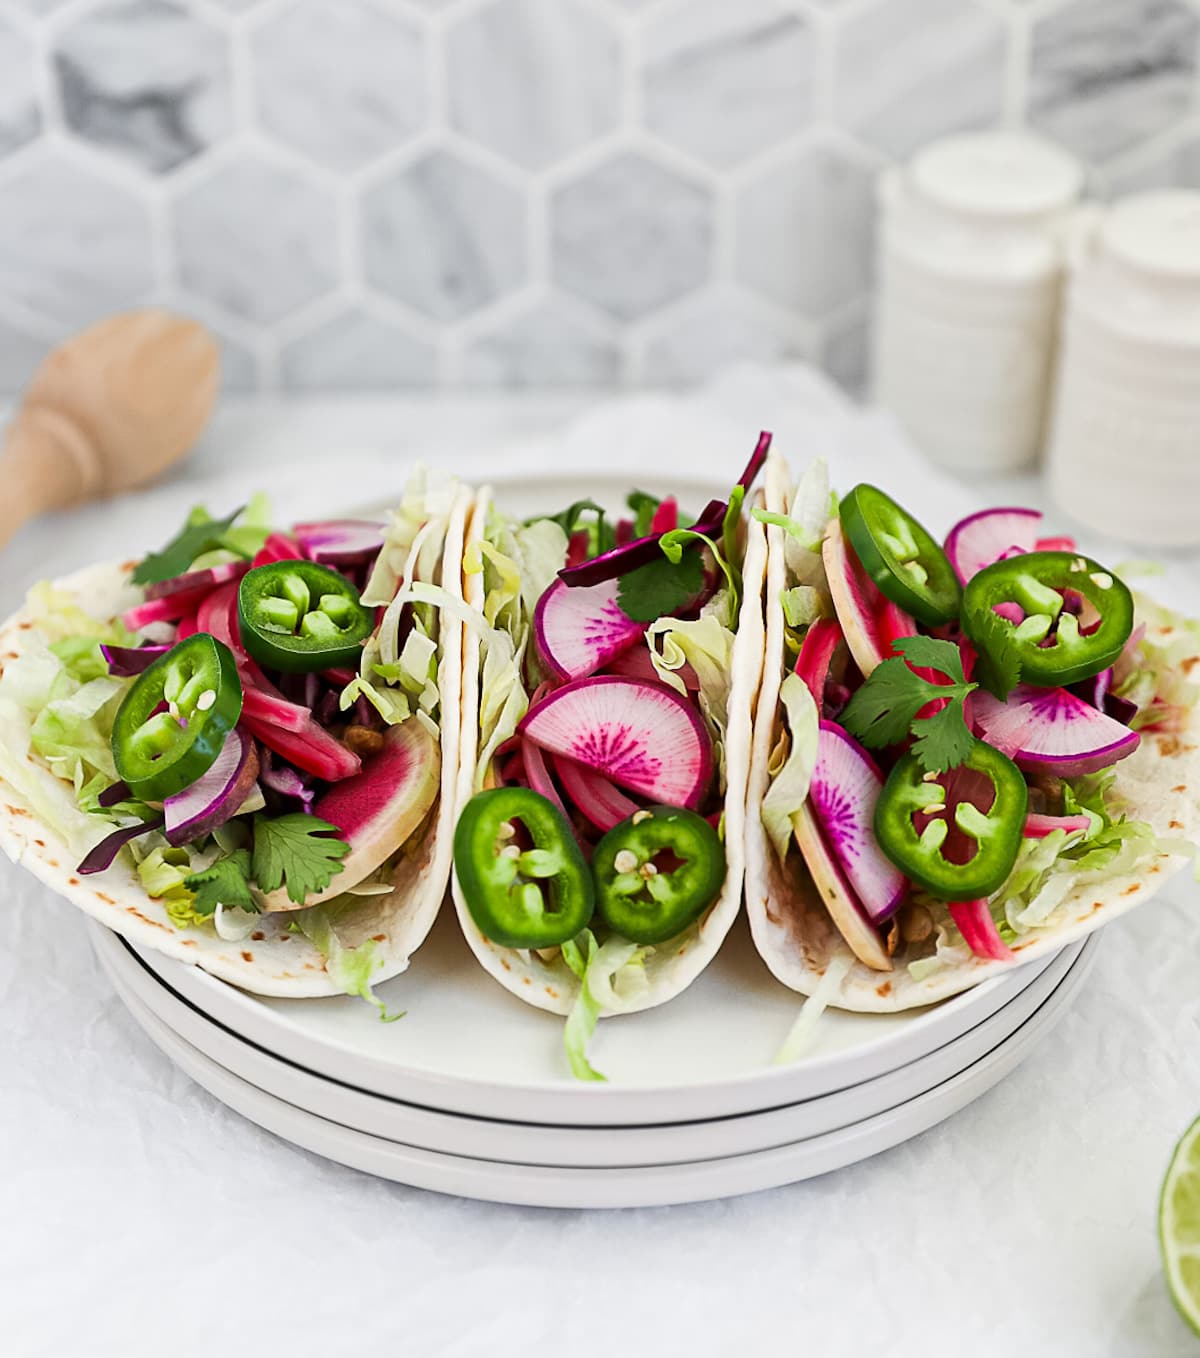 Three tacos filled with vibrant, fresh vegetables including: japalenos, radishes, lettuce, and onions.